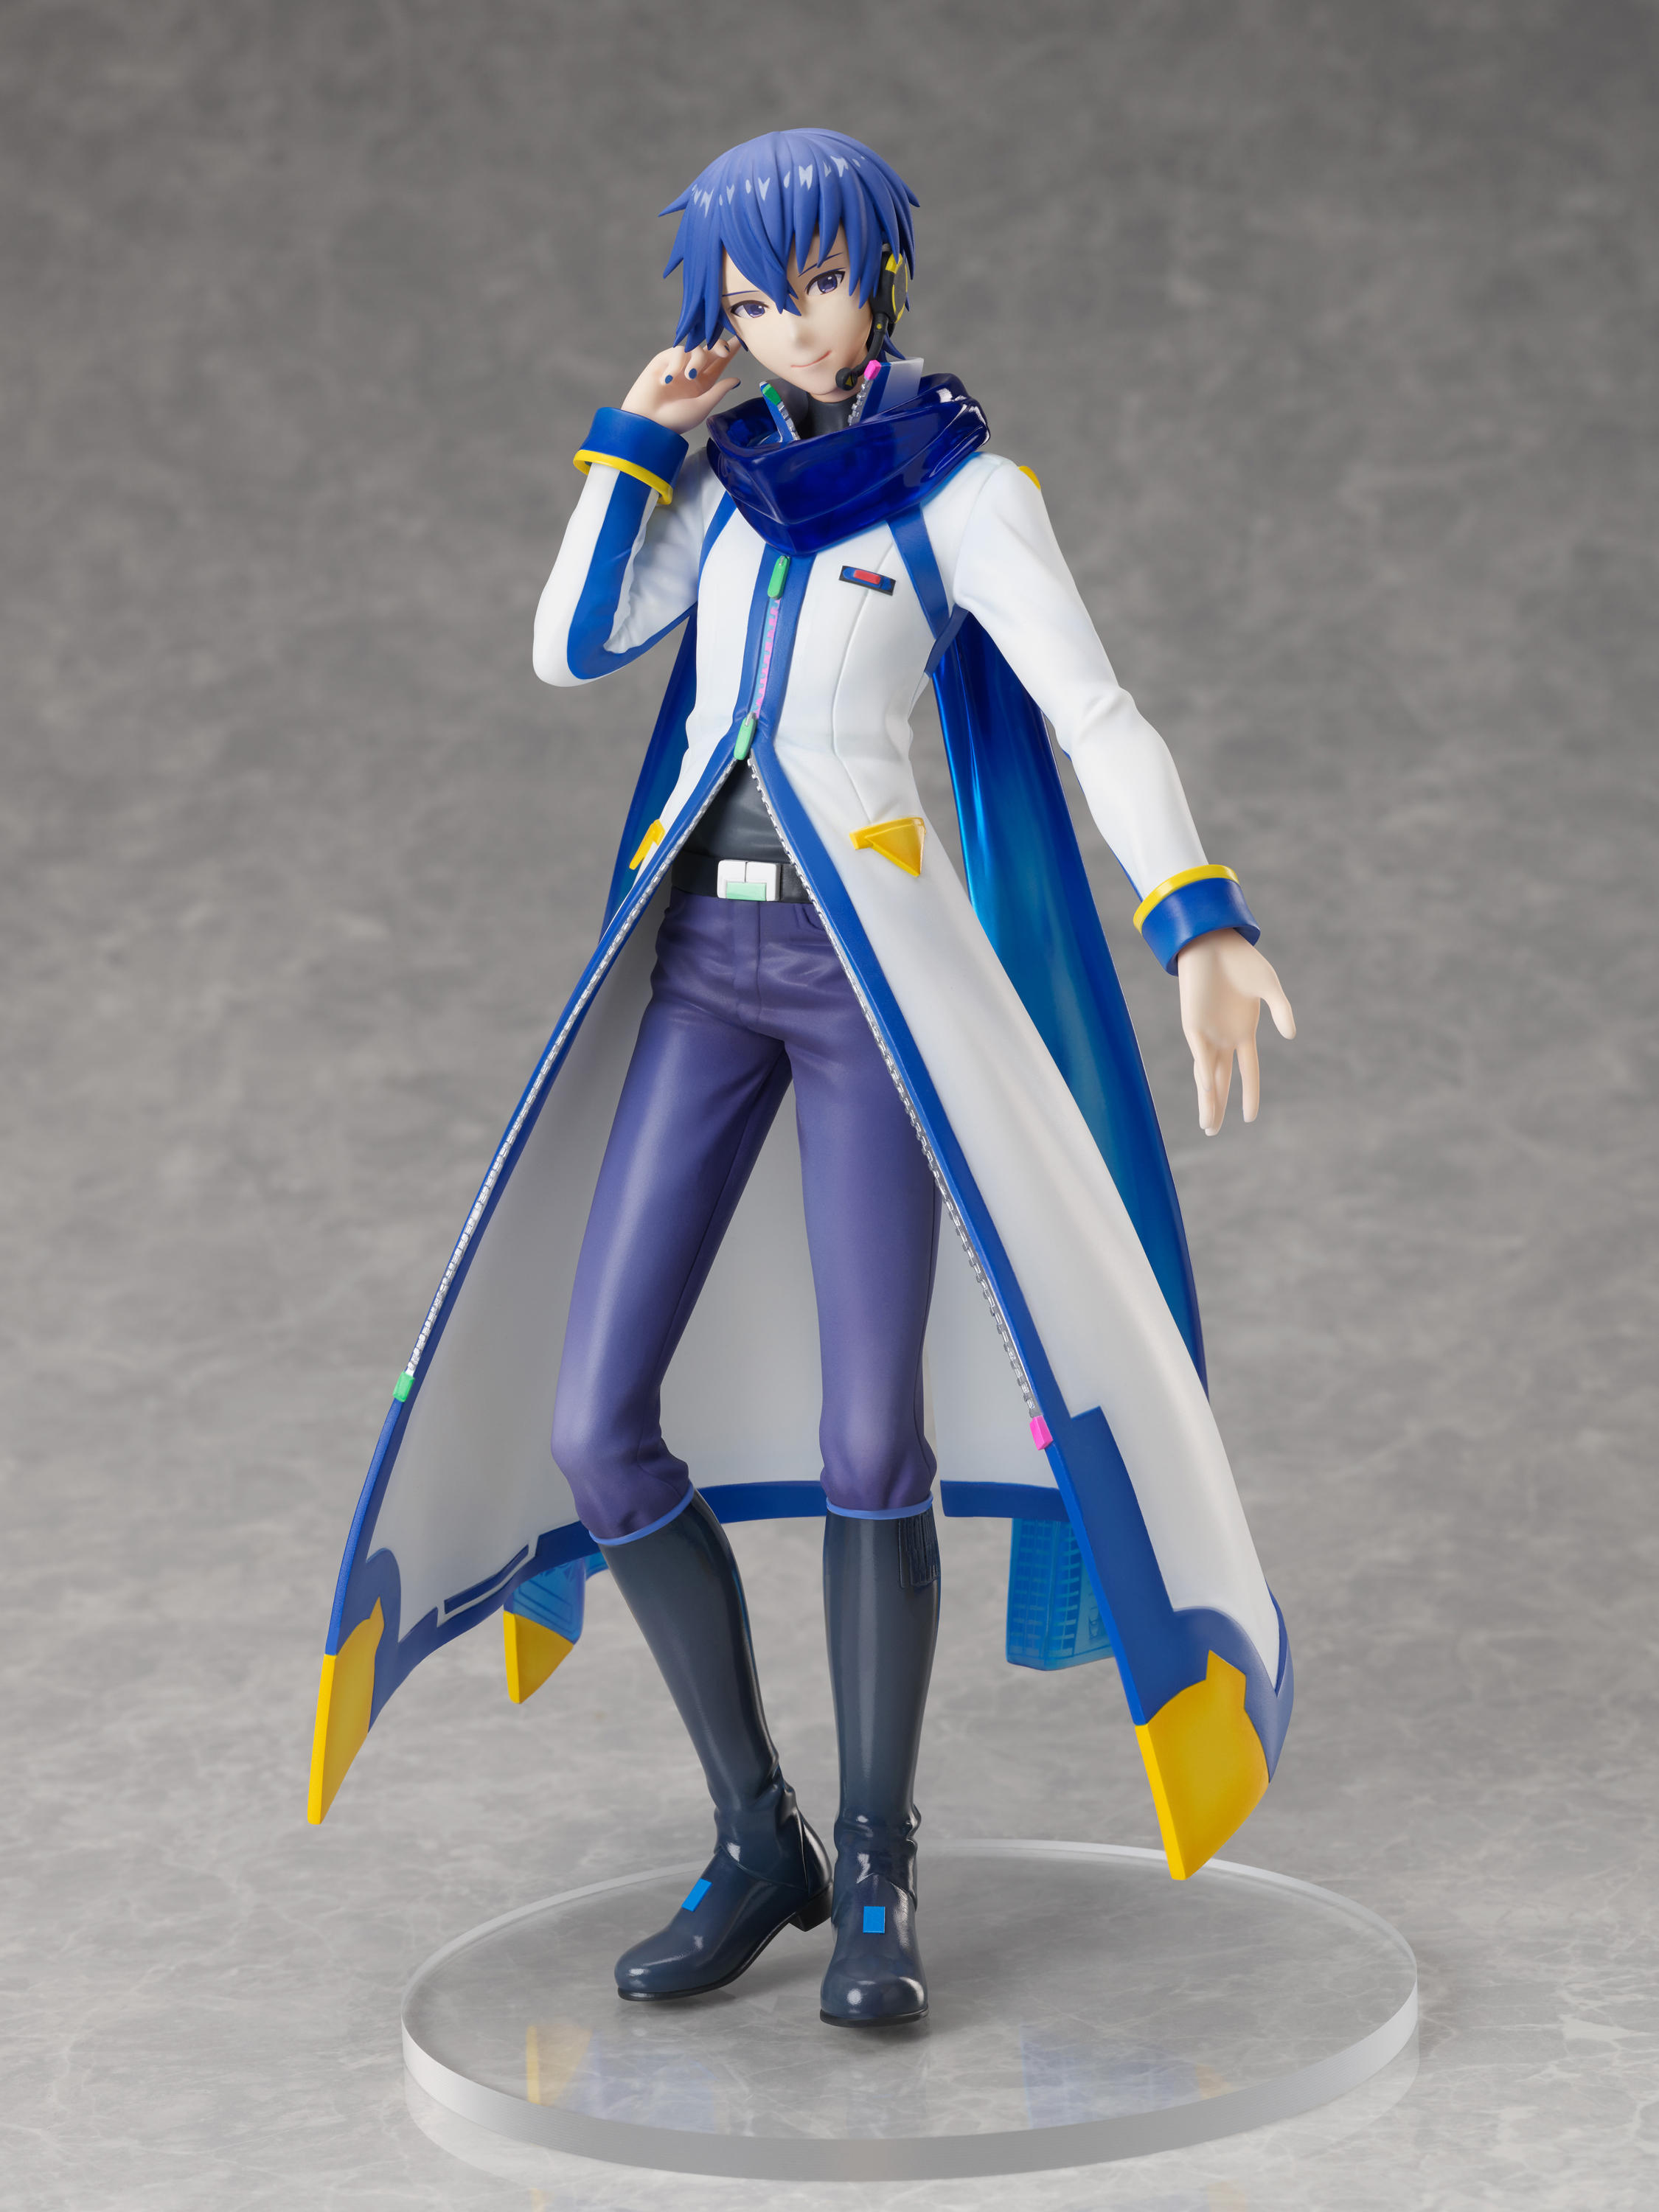 F:NEX PIAPRO CHARACTERS KAITO 1/7 Scale Figure		